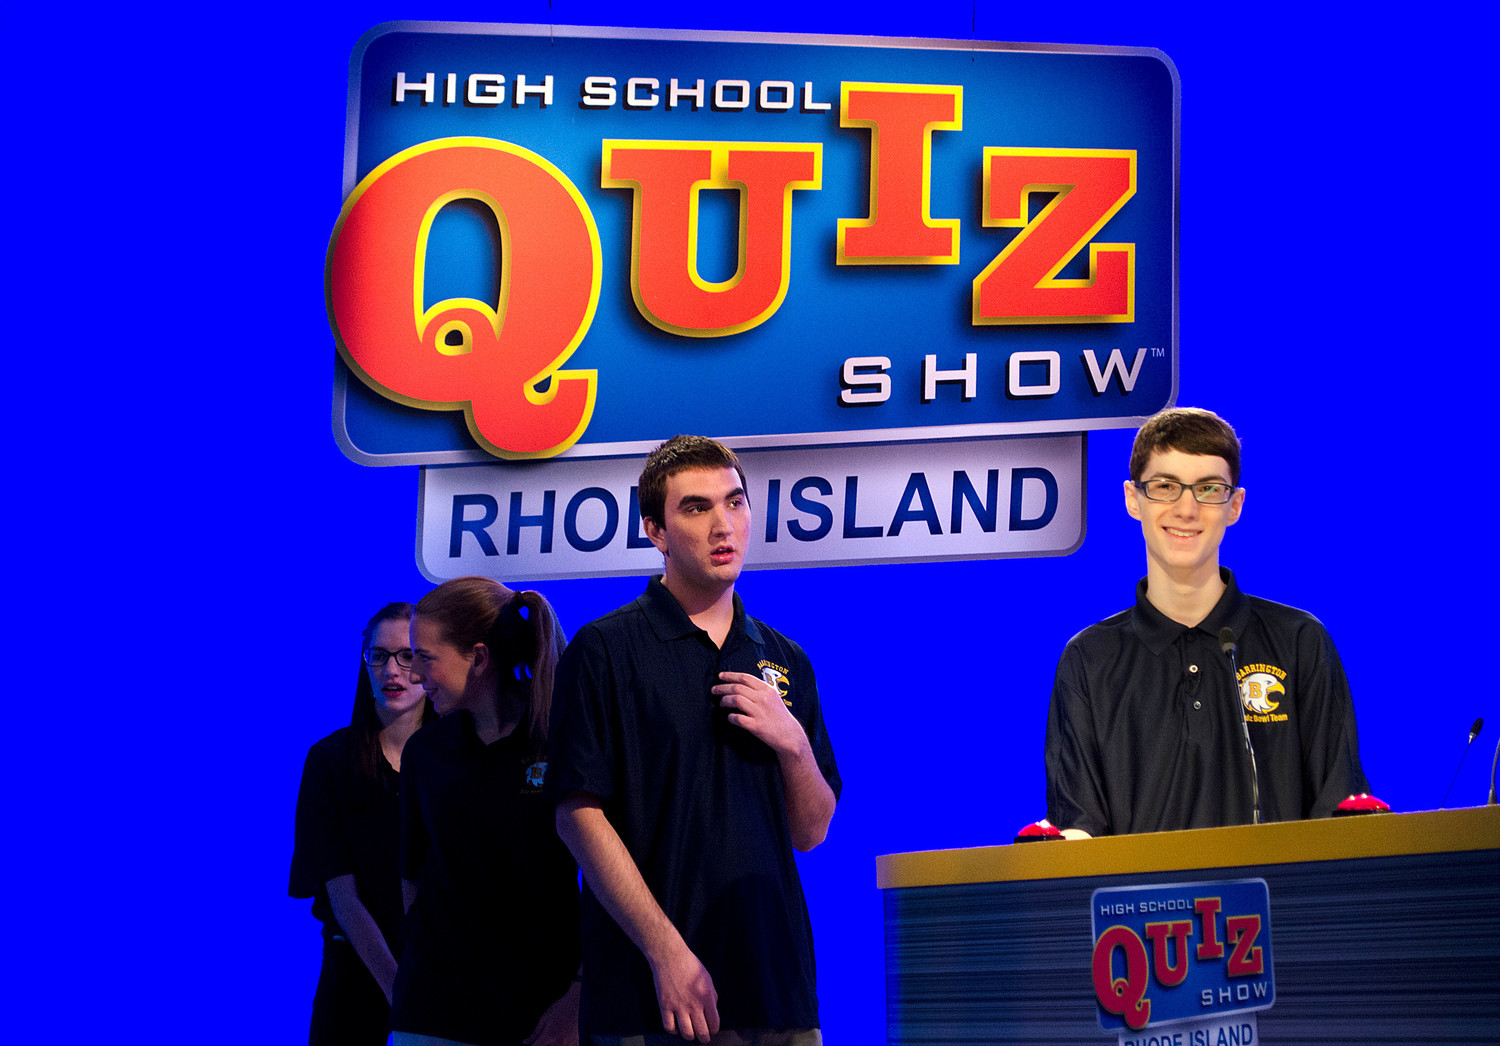 Barrington students Michael Lamontagne (left) and Daniel Sheinberg (right) line up for the lightning round.